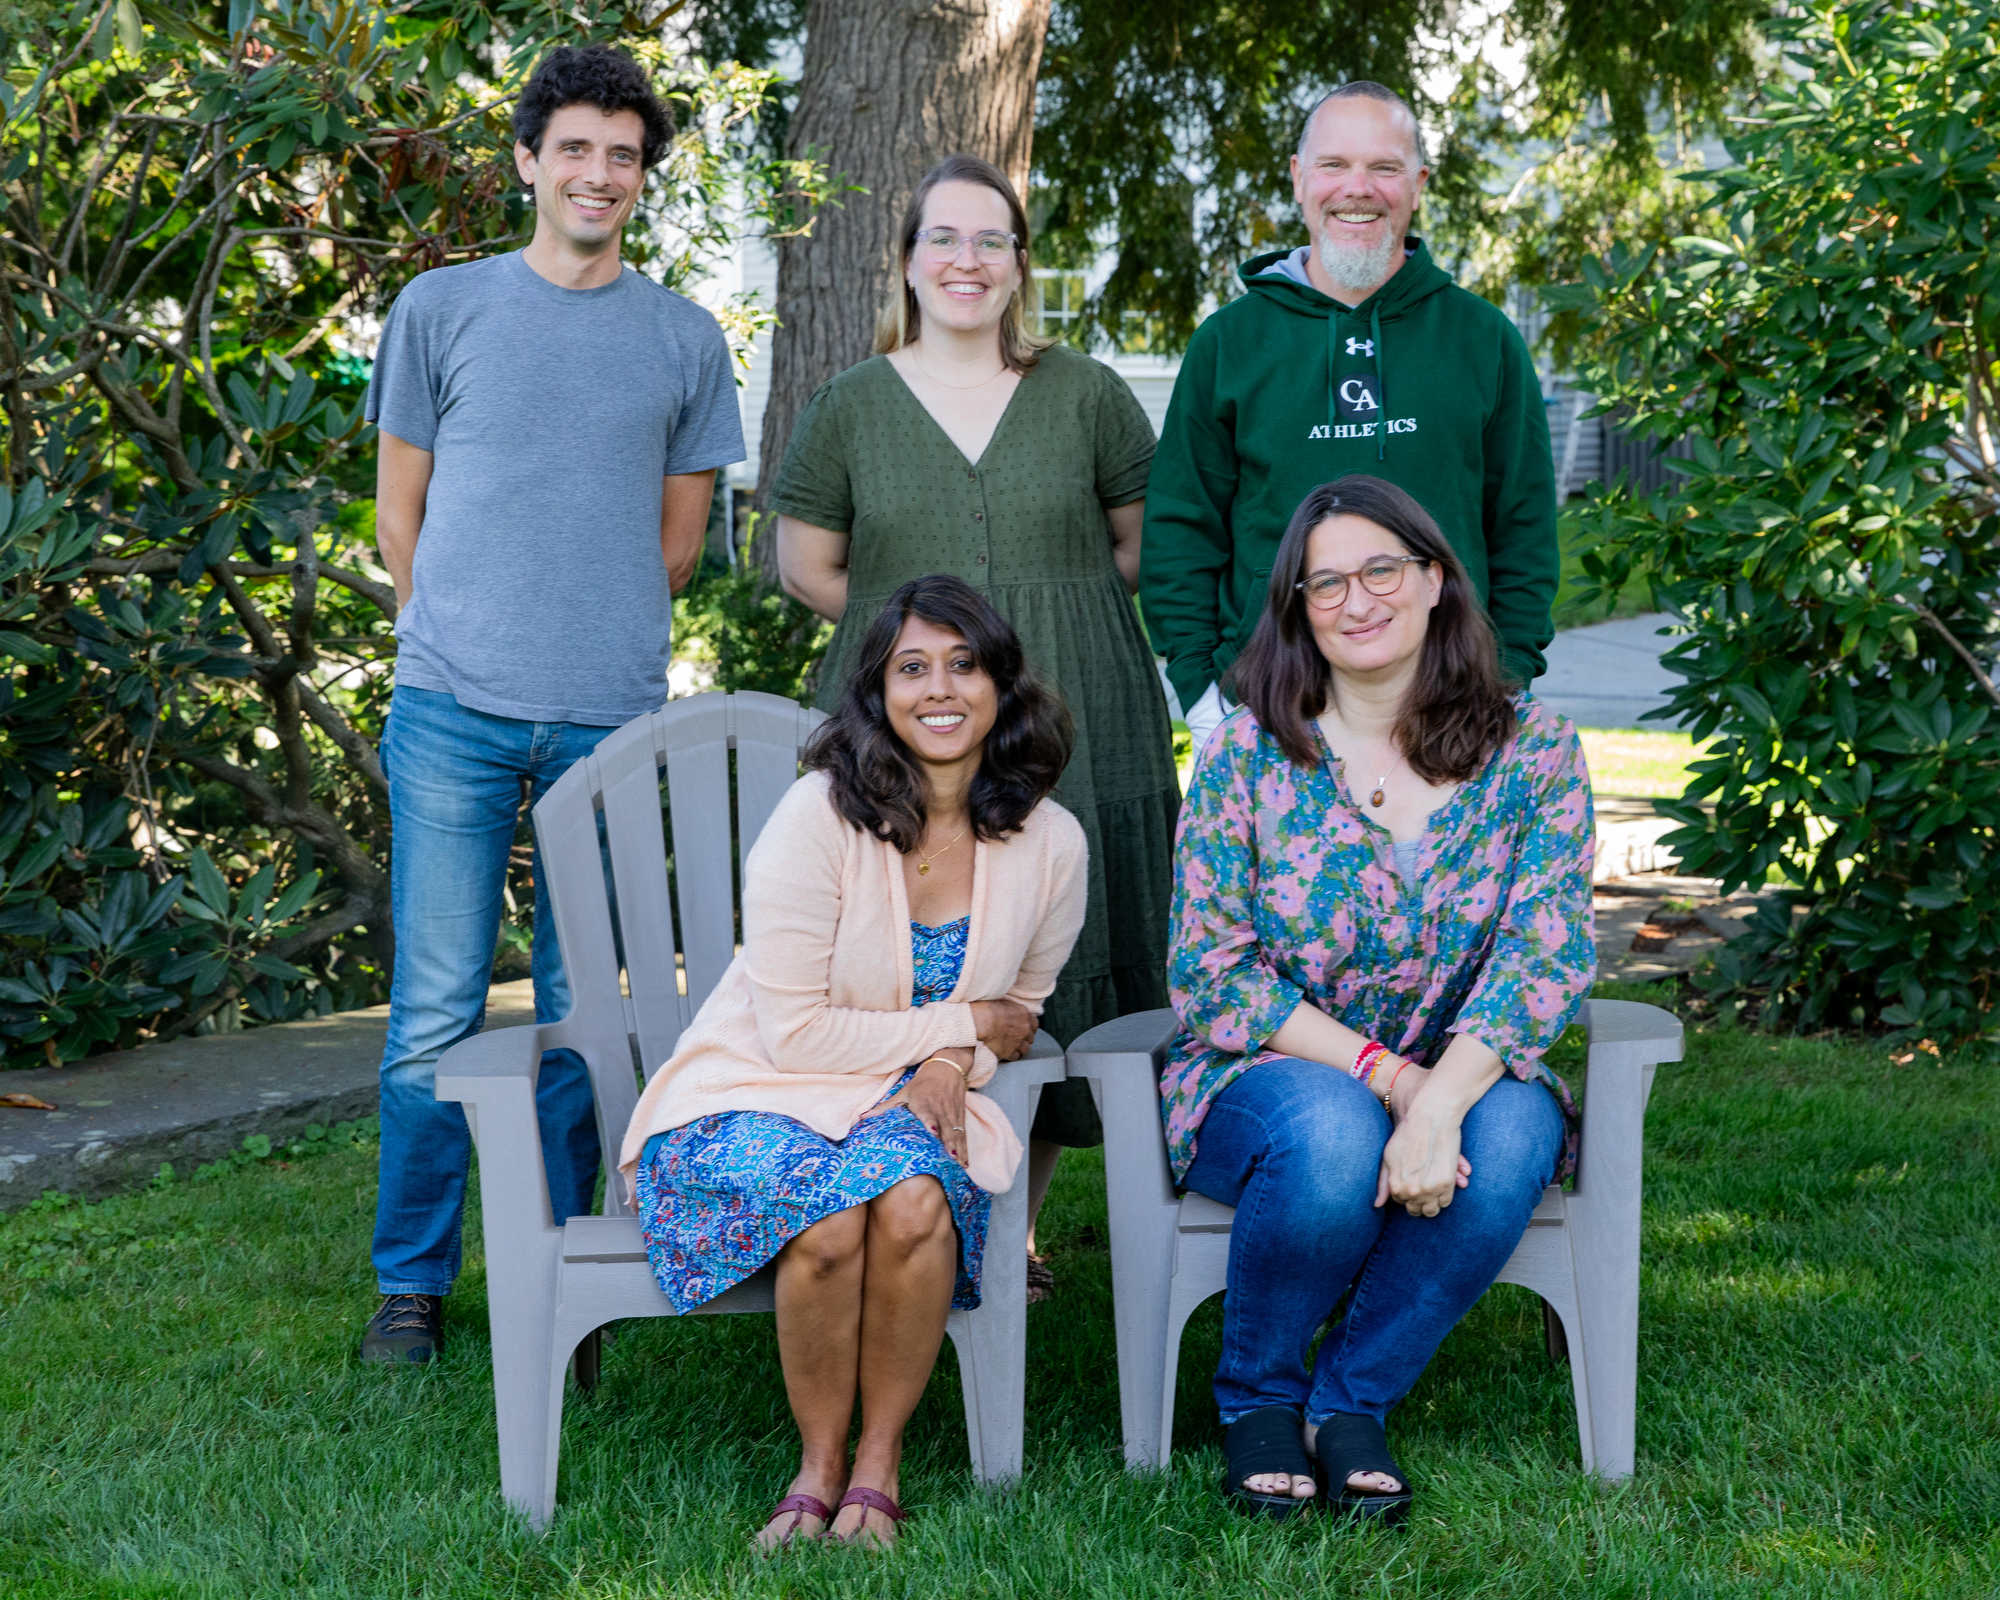 Six faculty and staff members pose for picture on green lawn.